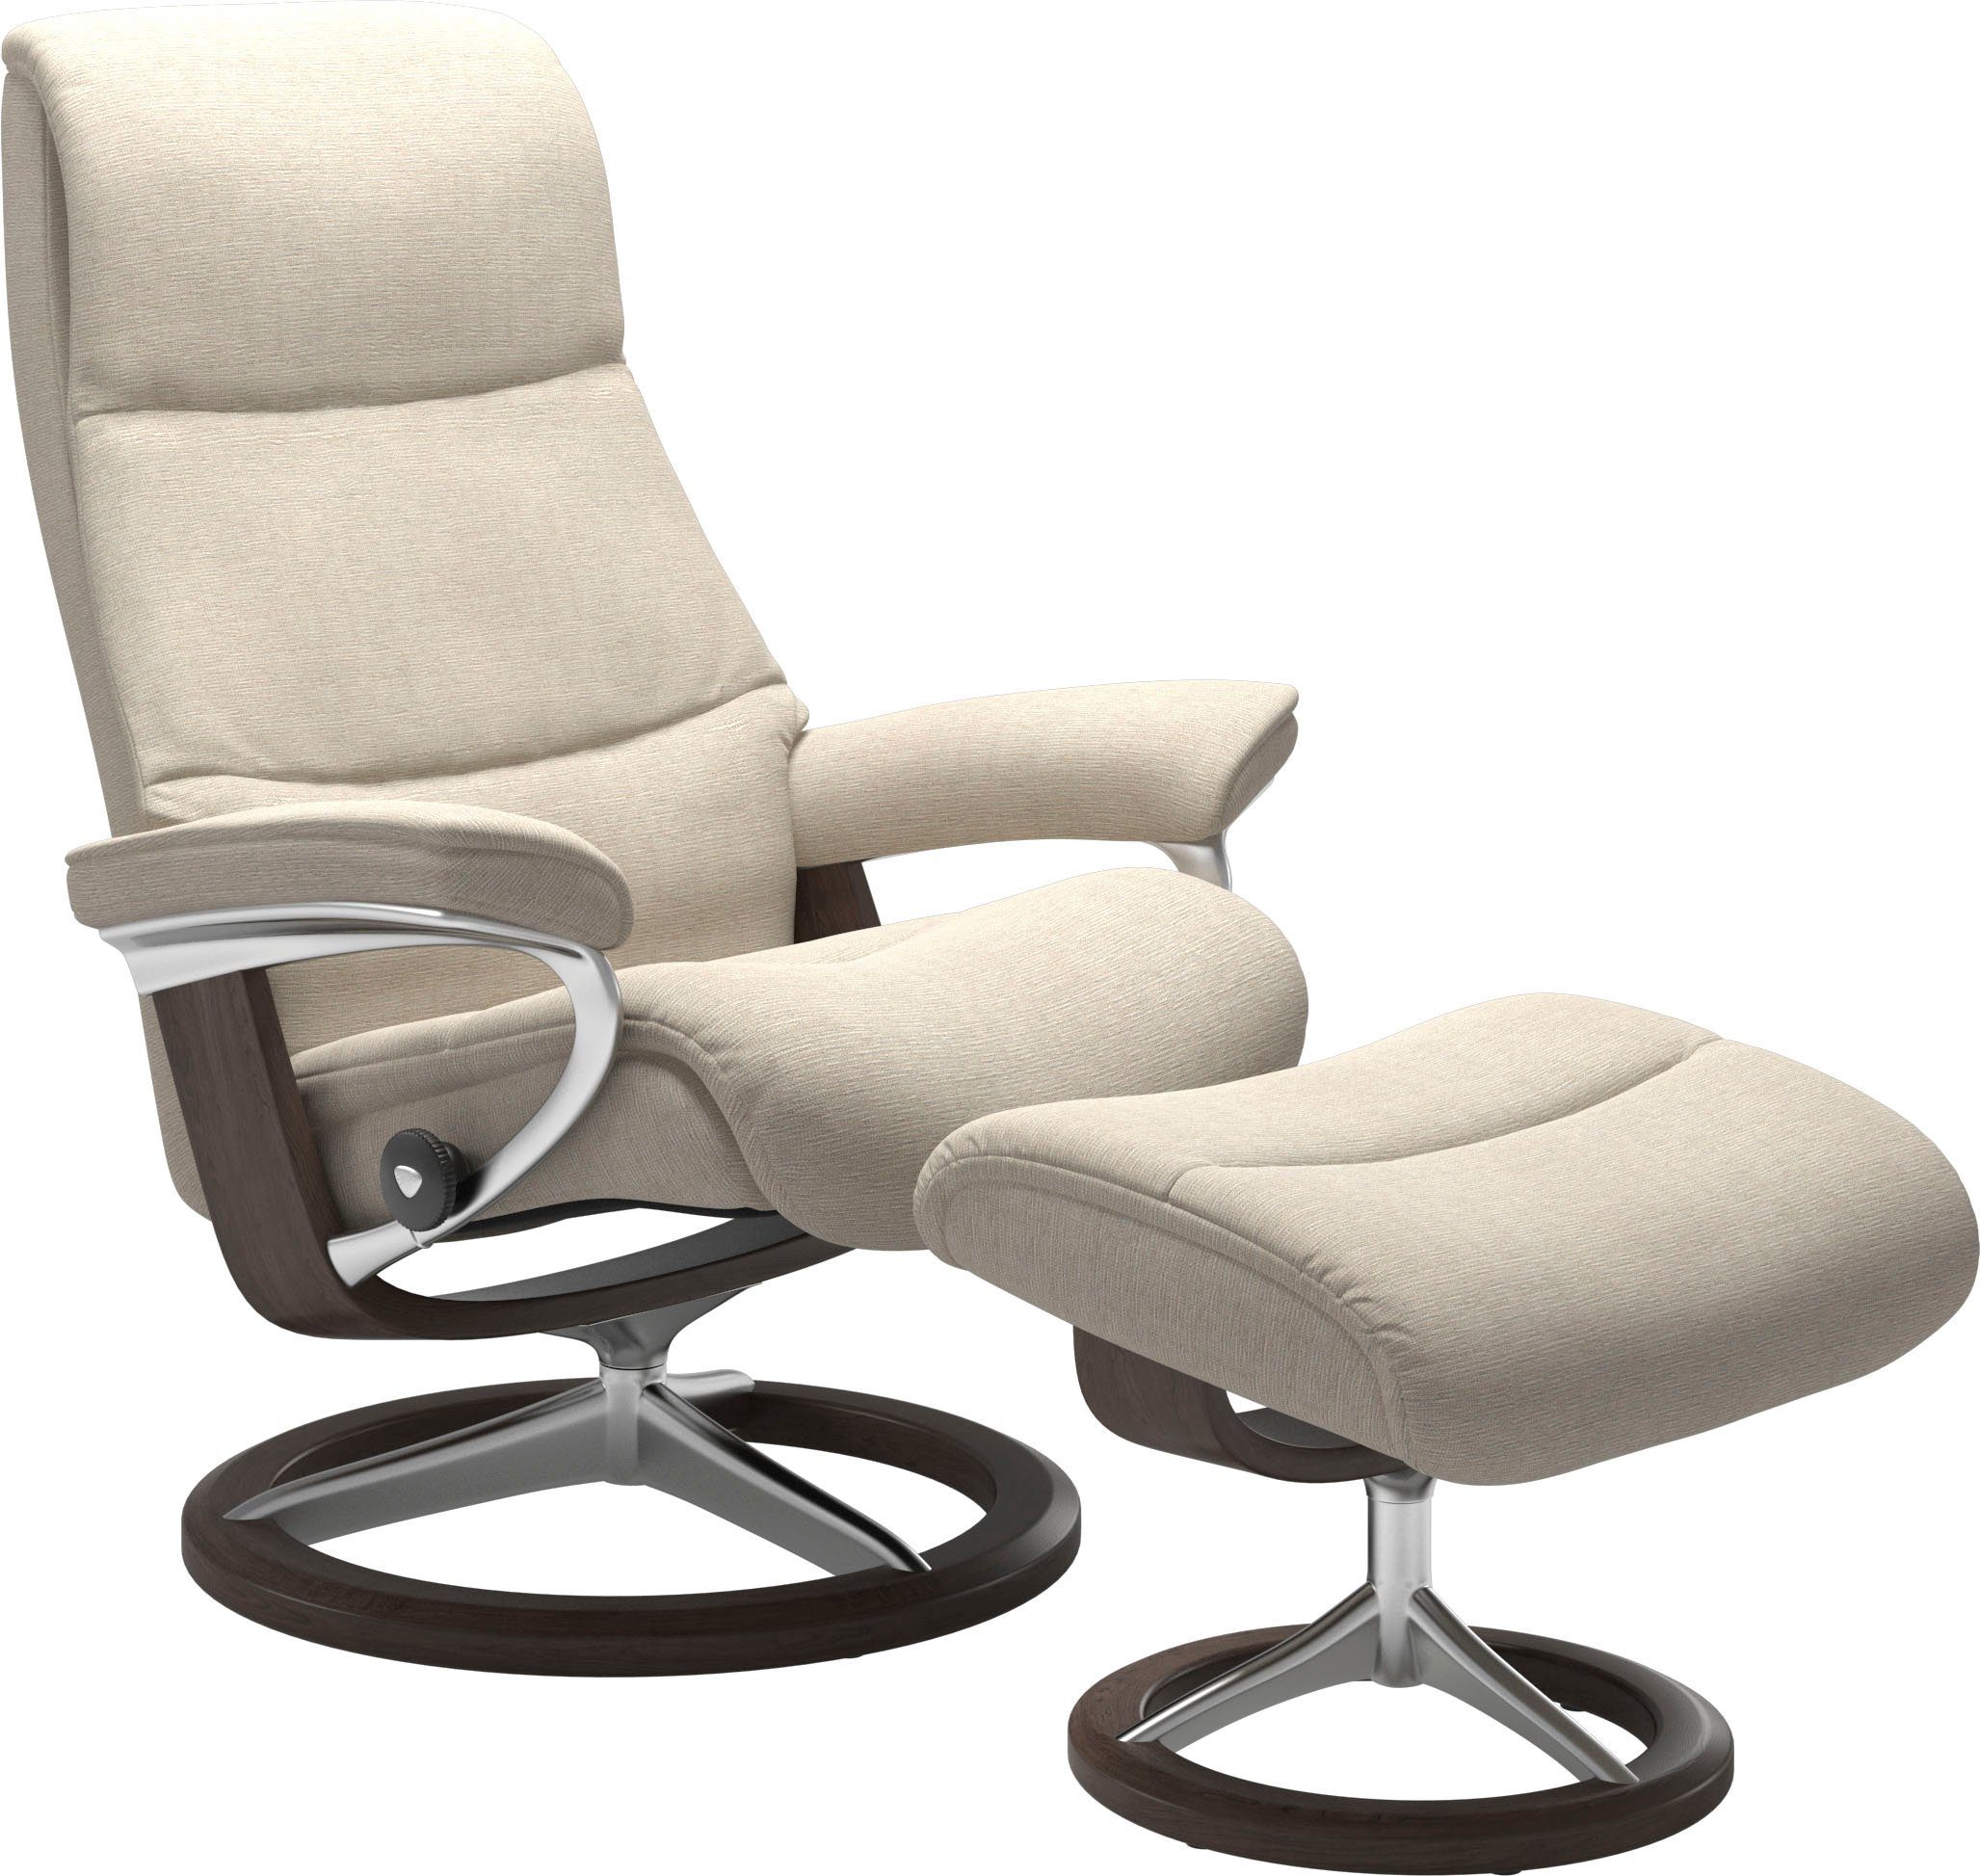 S,Gestell Stressless® View, Größe Signature Relaxsessel Base, mit Wenge